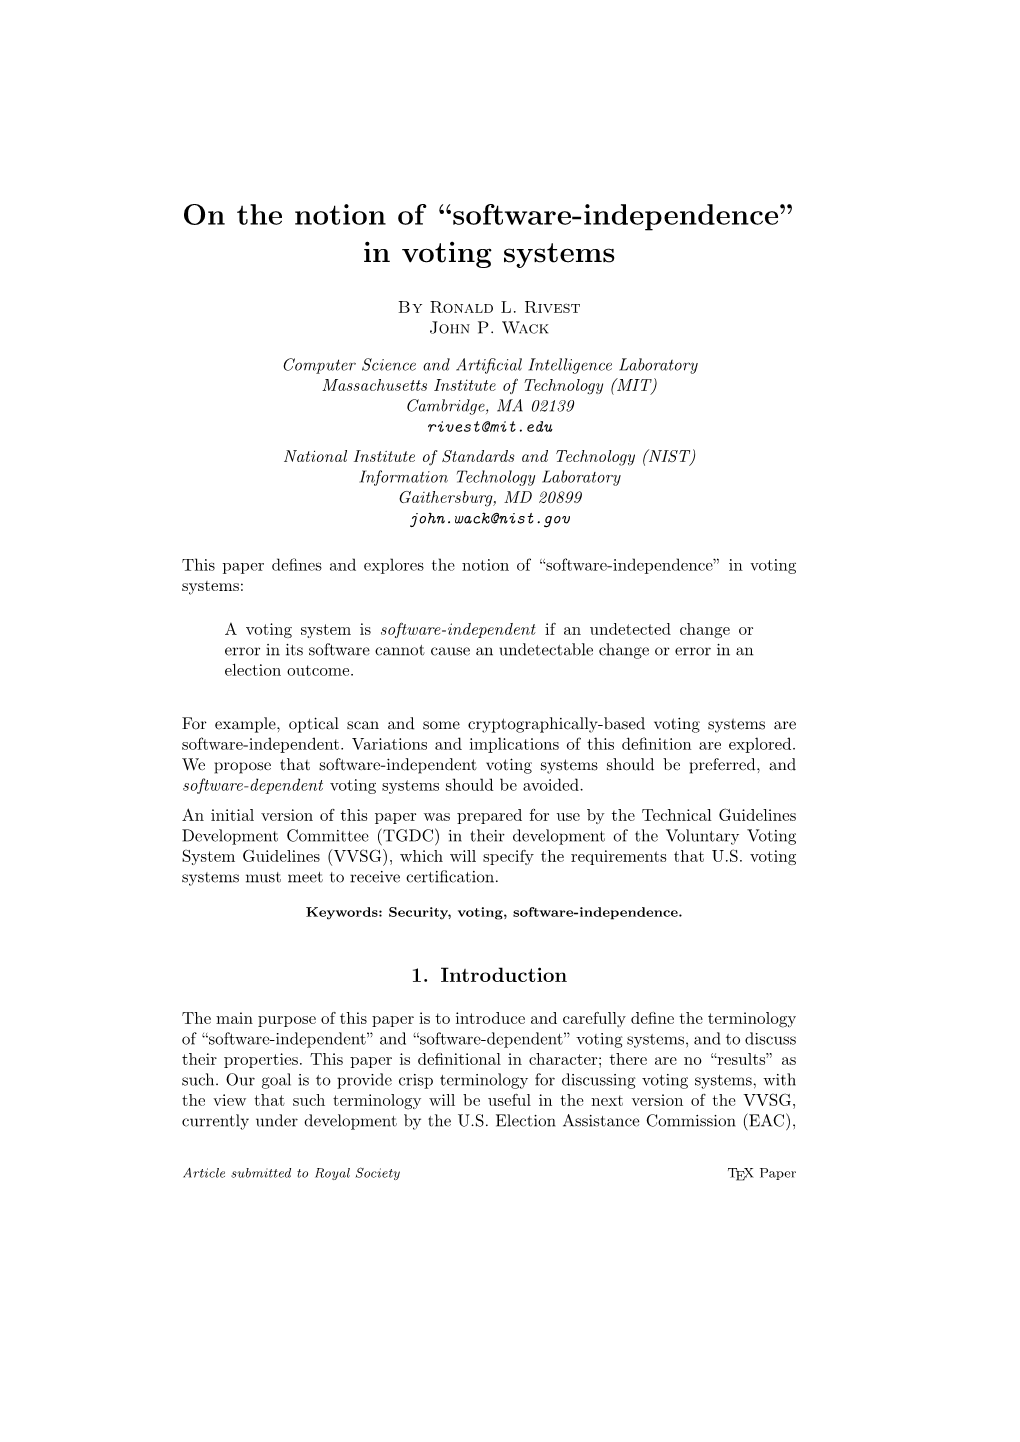 “Software-Independence” in Voting Systems